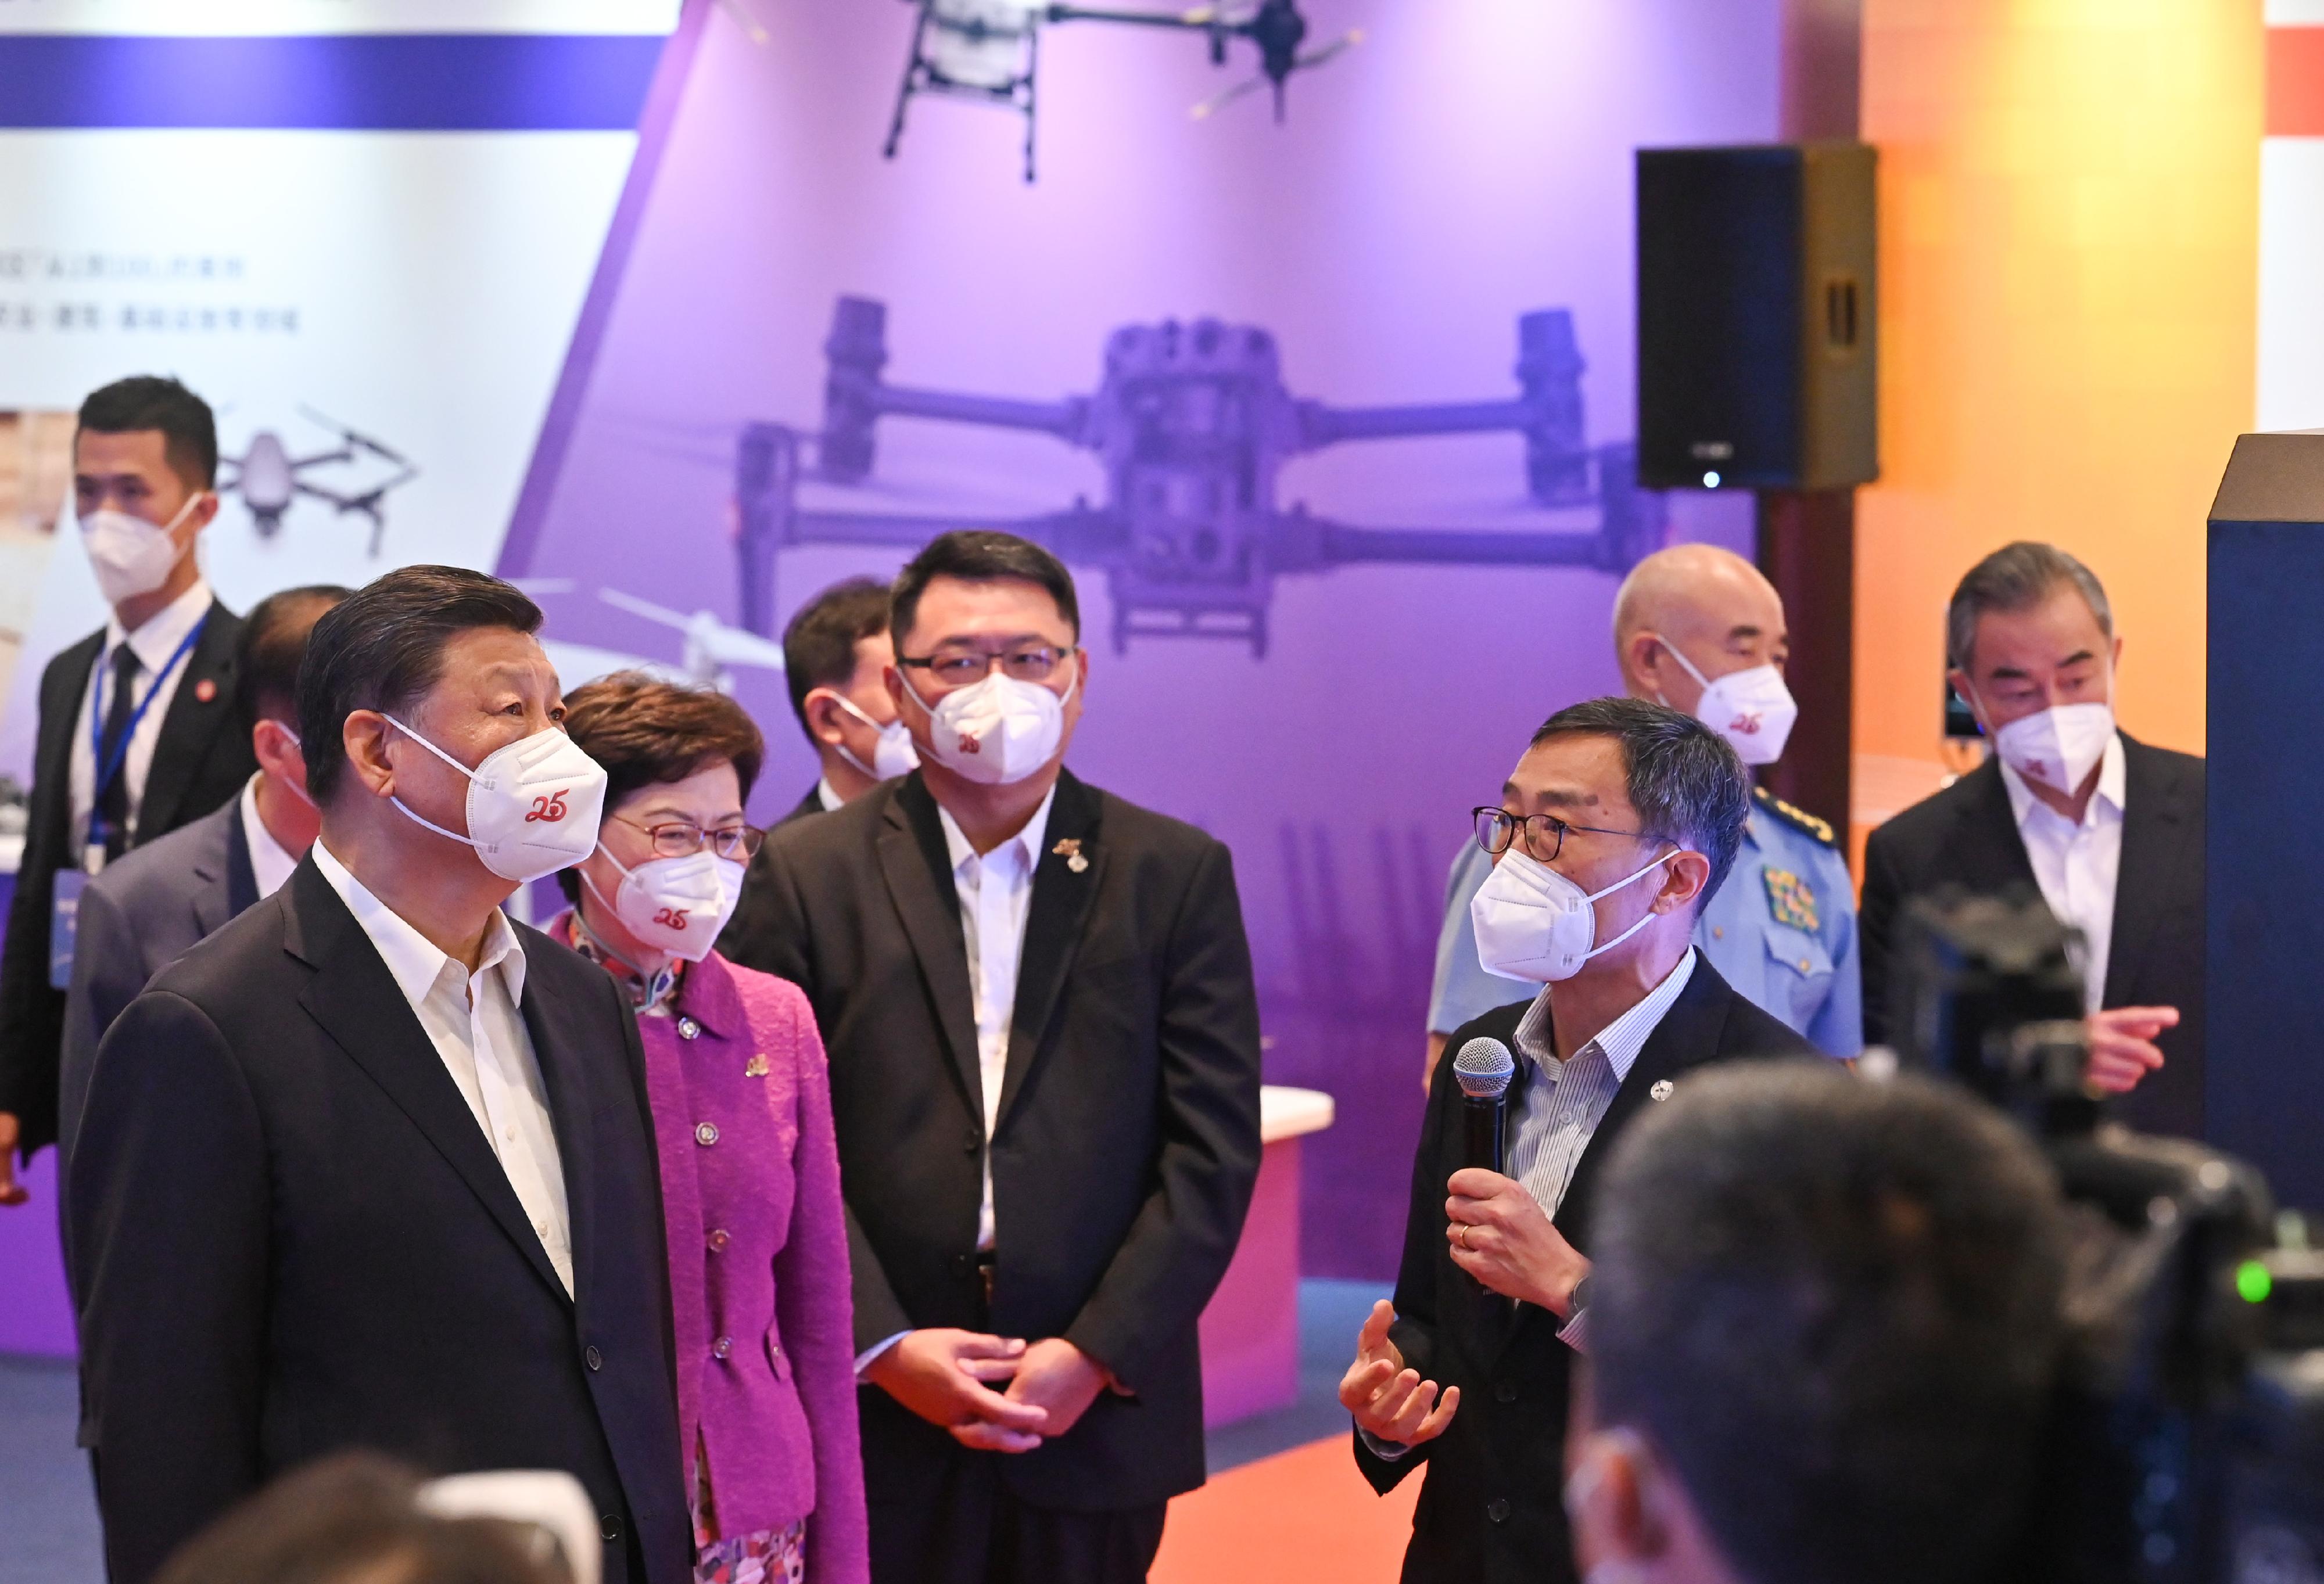 President Xi Jinping visited the Hong Kong Science Park to inspect the development of innovation and technology (I&T) in Hong Kong today (June 30). Photo shows President Xi (first left), accompanied by the Chief Executive, Mrs Carrie Lam (second left), receiving a briefing from the Chief Executive Officer of the Hong Kong Science and Technology Parks Corporation, Mr Albert Wong (fourth left), on Hong Kong's I&T development and prospects.
